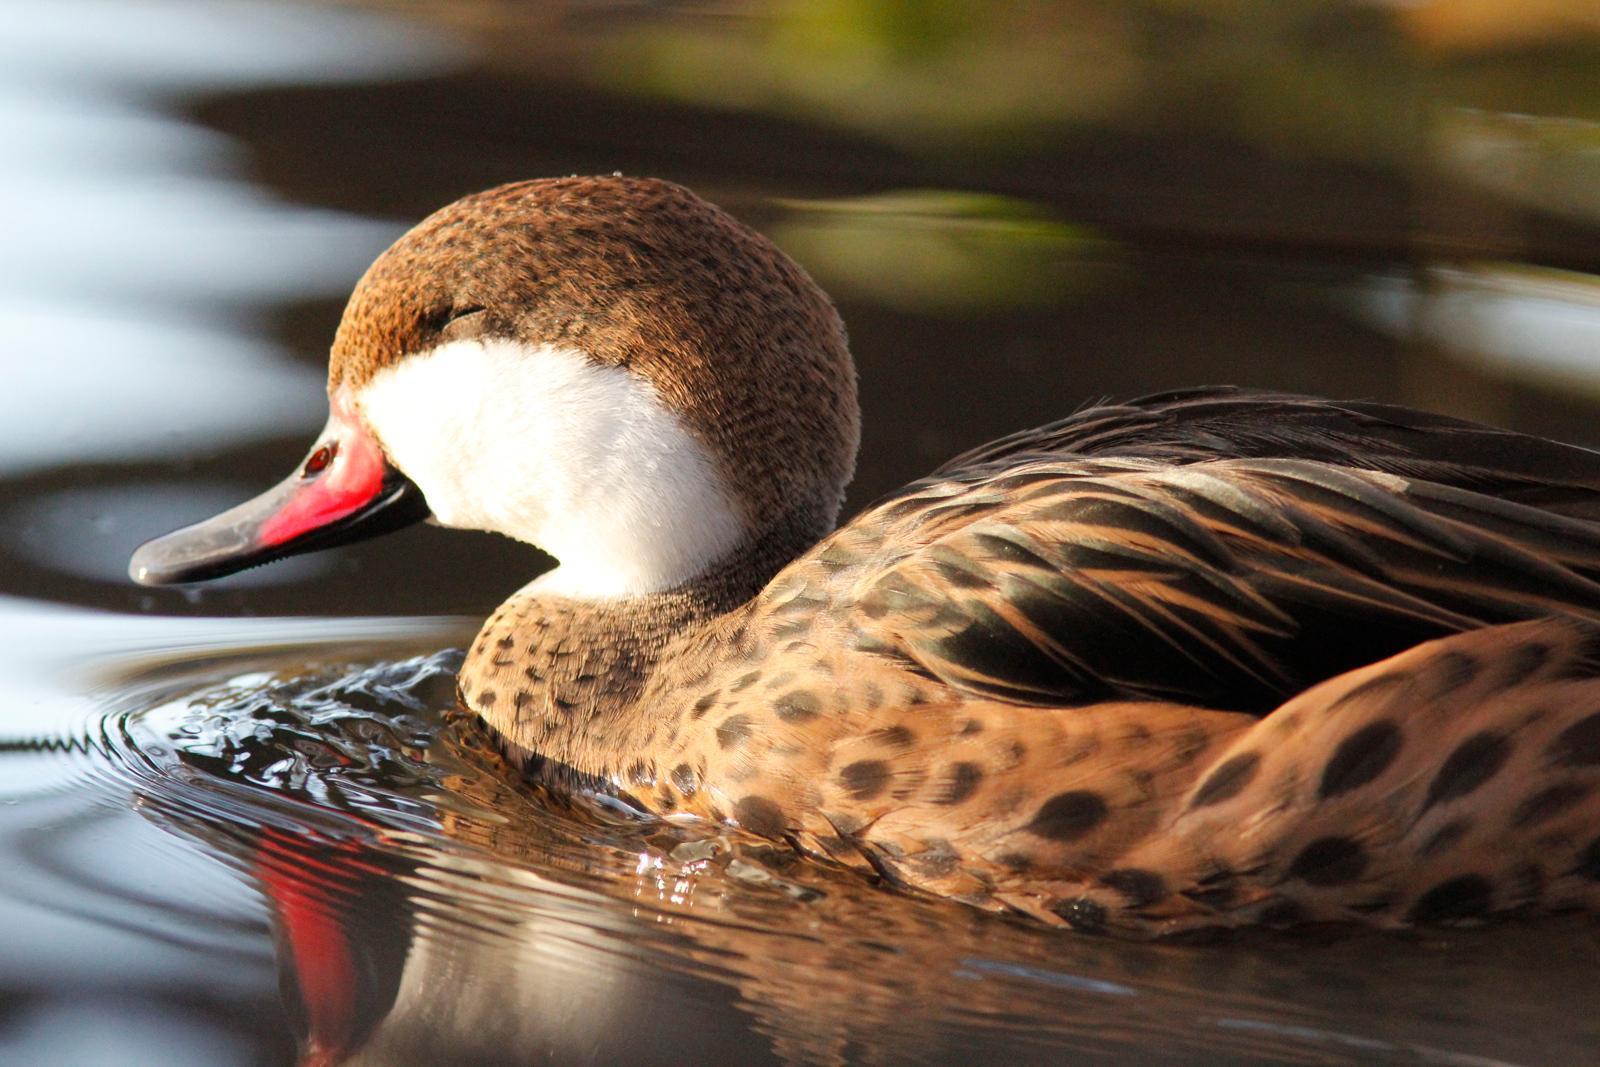 White-cheeked Pintail Photo by Emily Willoughby